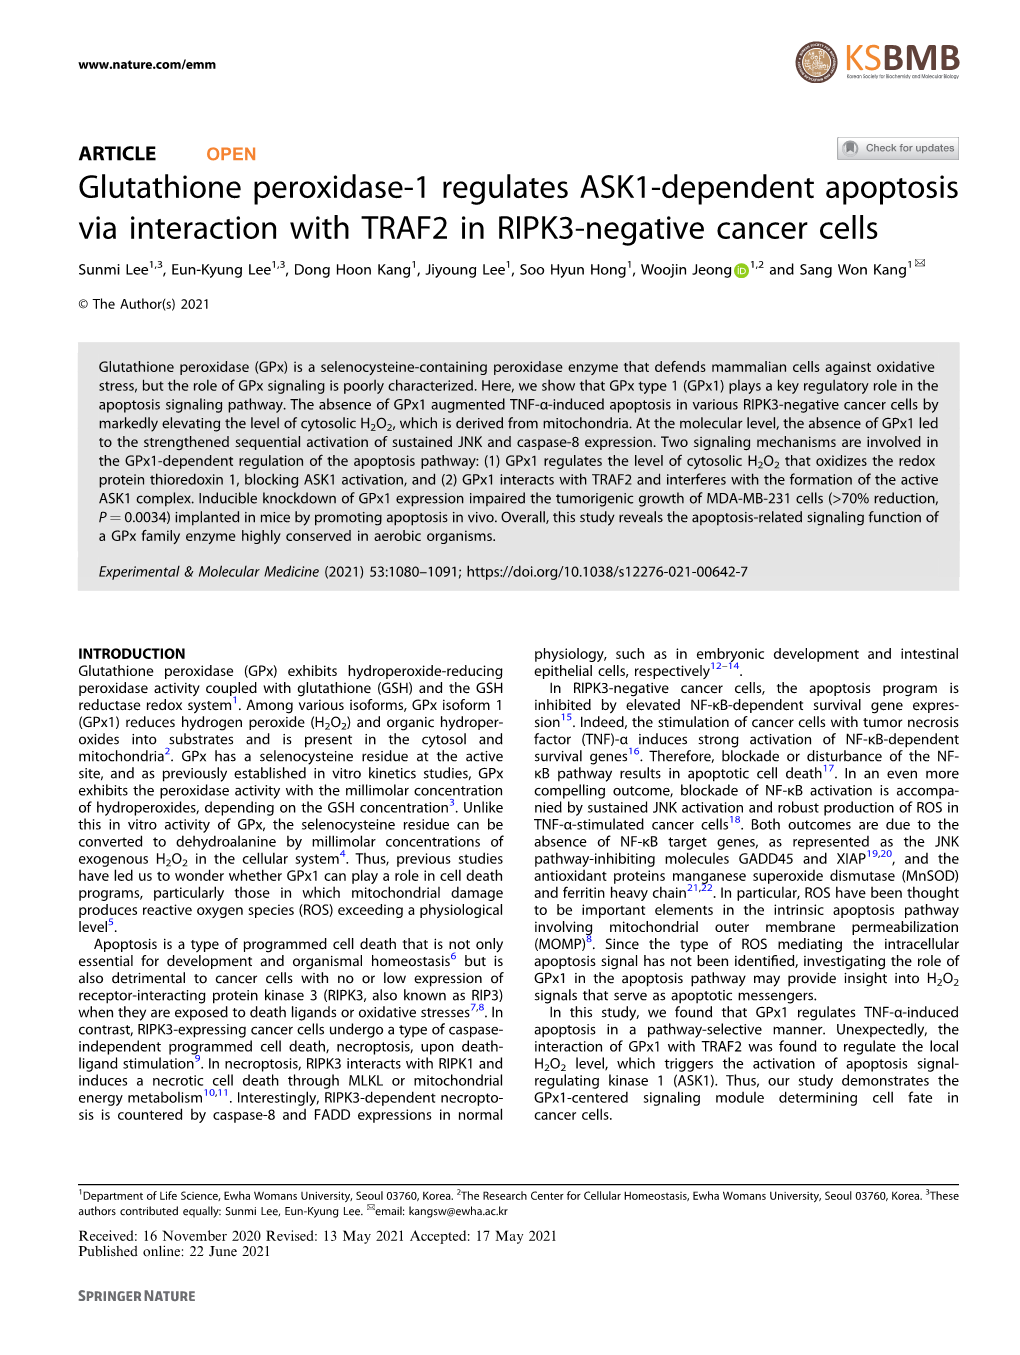 Glutathione Peroxidase-1 Regulates ASK1-Dependent Apoptosis Via Interaction with TRAF2 in RIPK3-Negative Cancer Cells